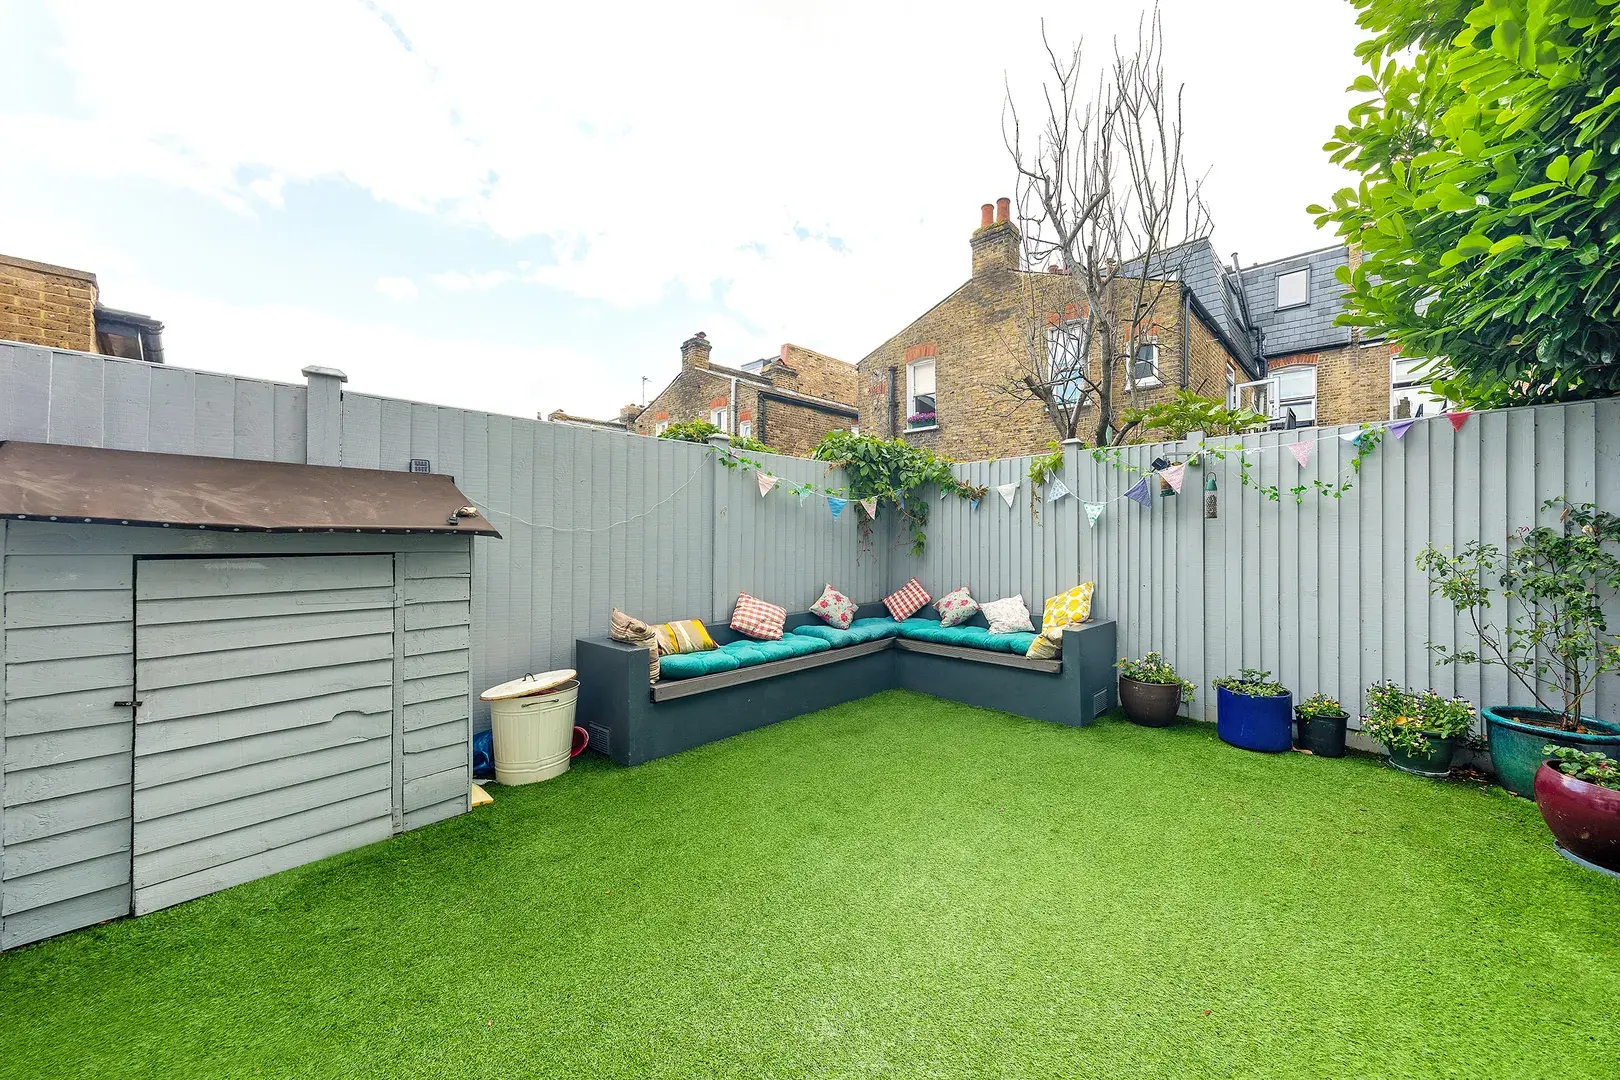 Strathville Road, holiday home in Wimbledon – South London, London